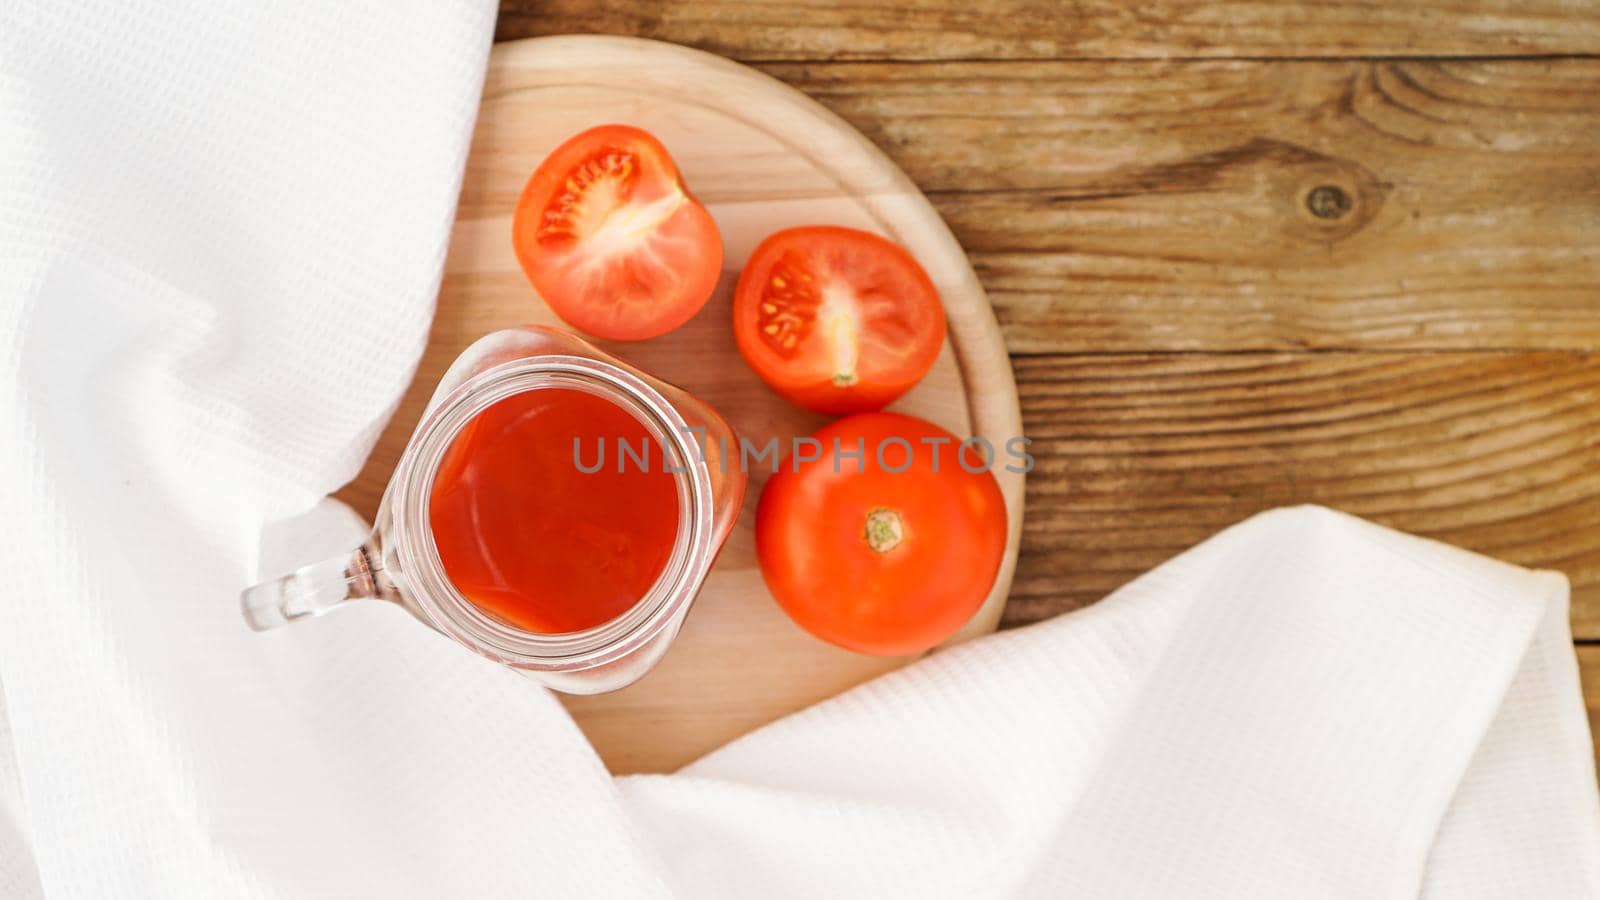 Tomato juice in glass jar and fresh tomatoes on wooden cutting board and white towel - Top view